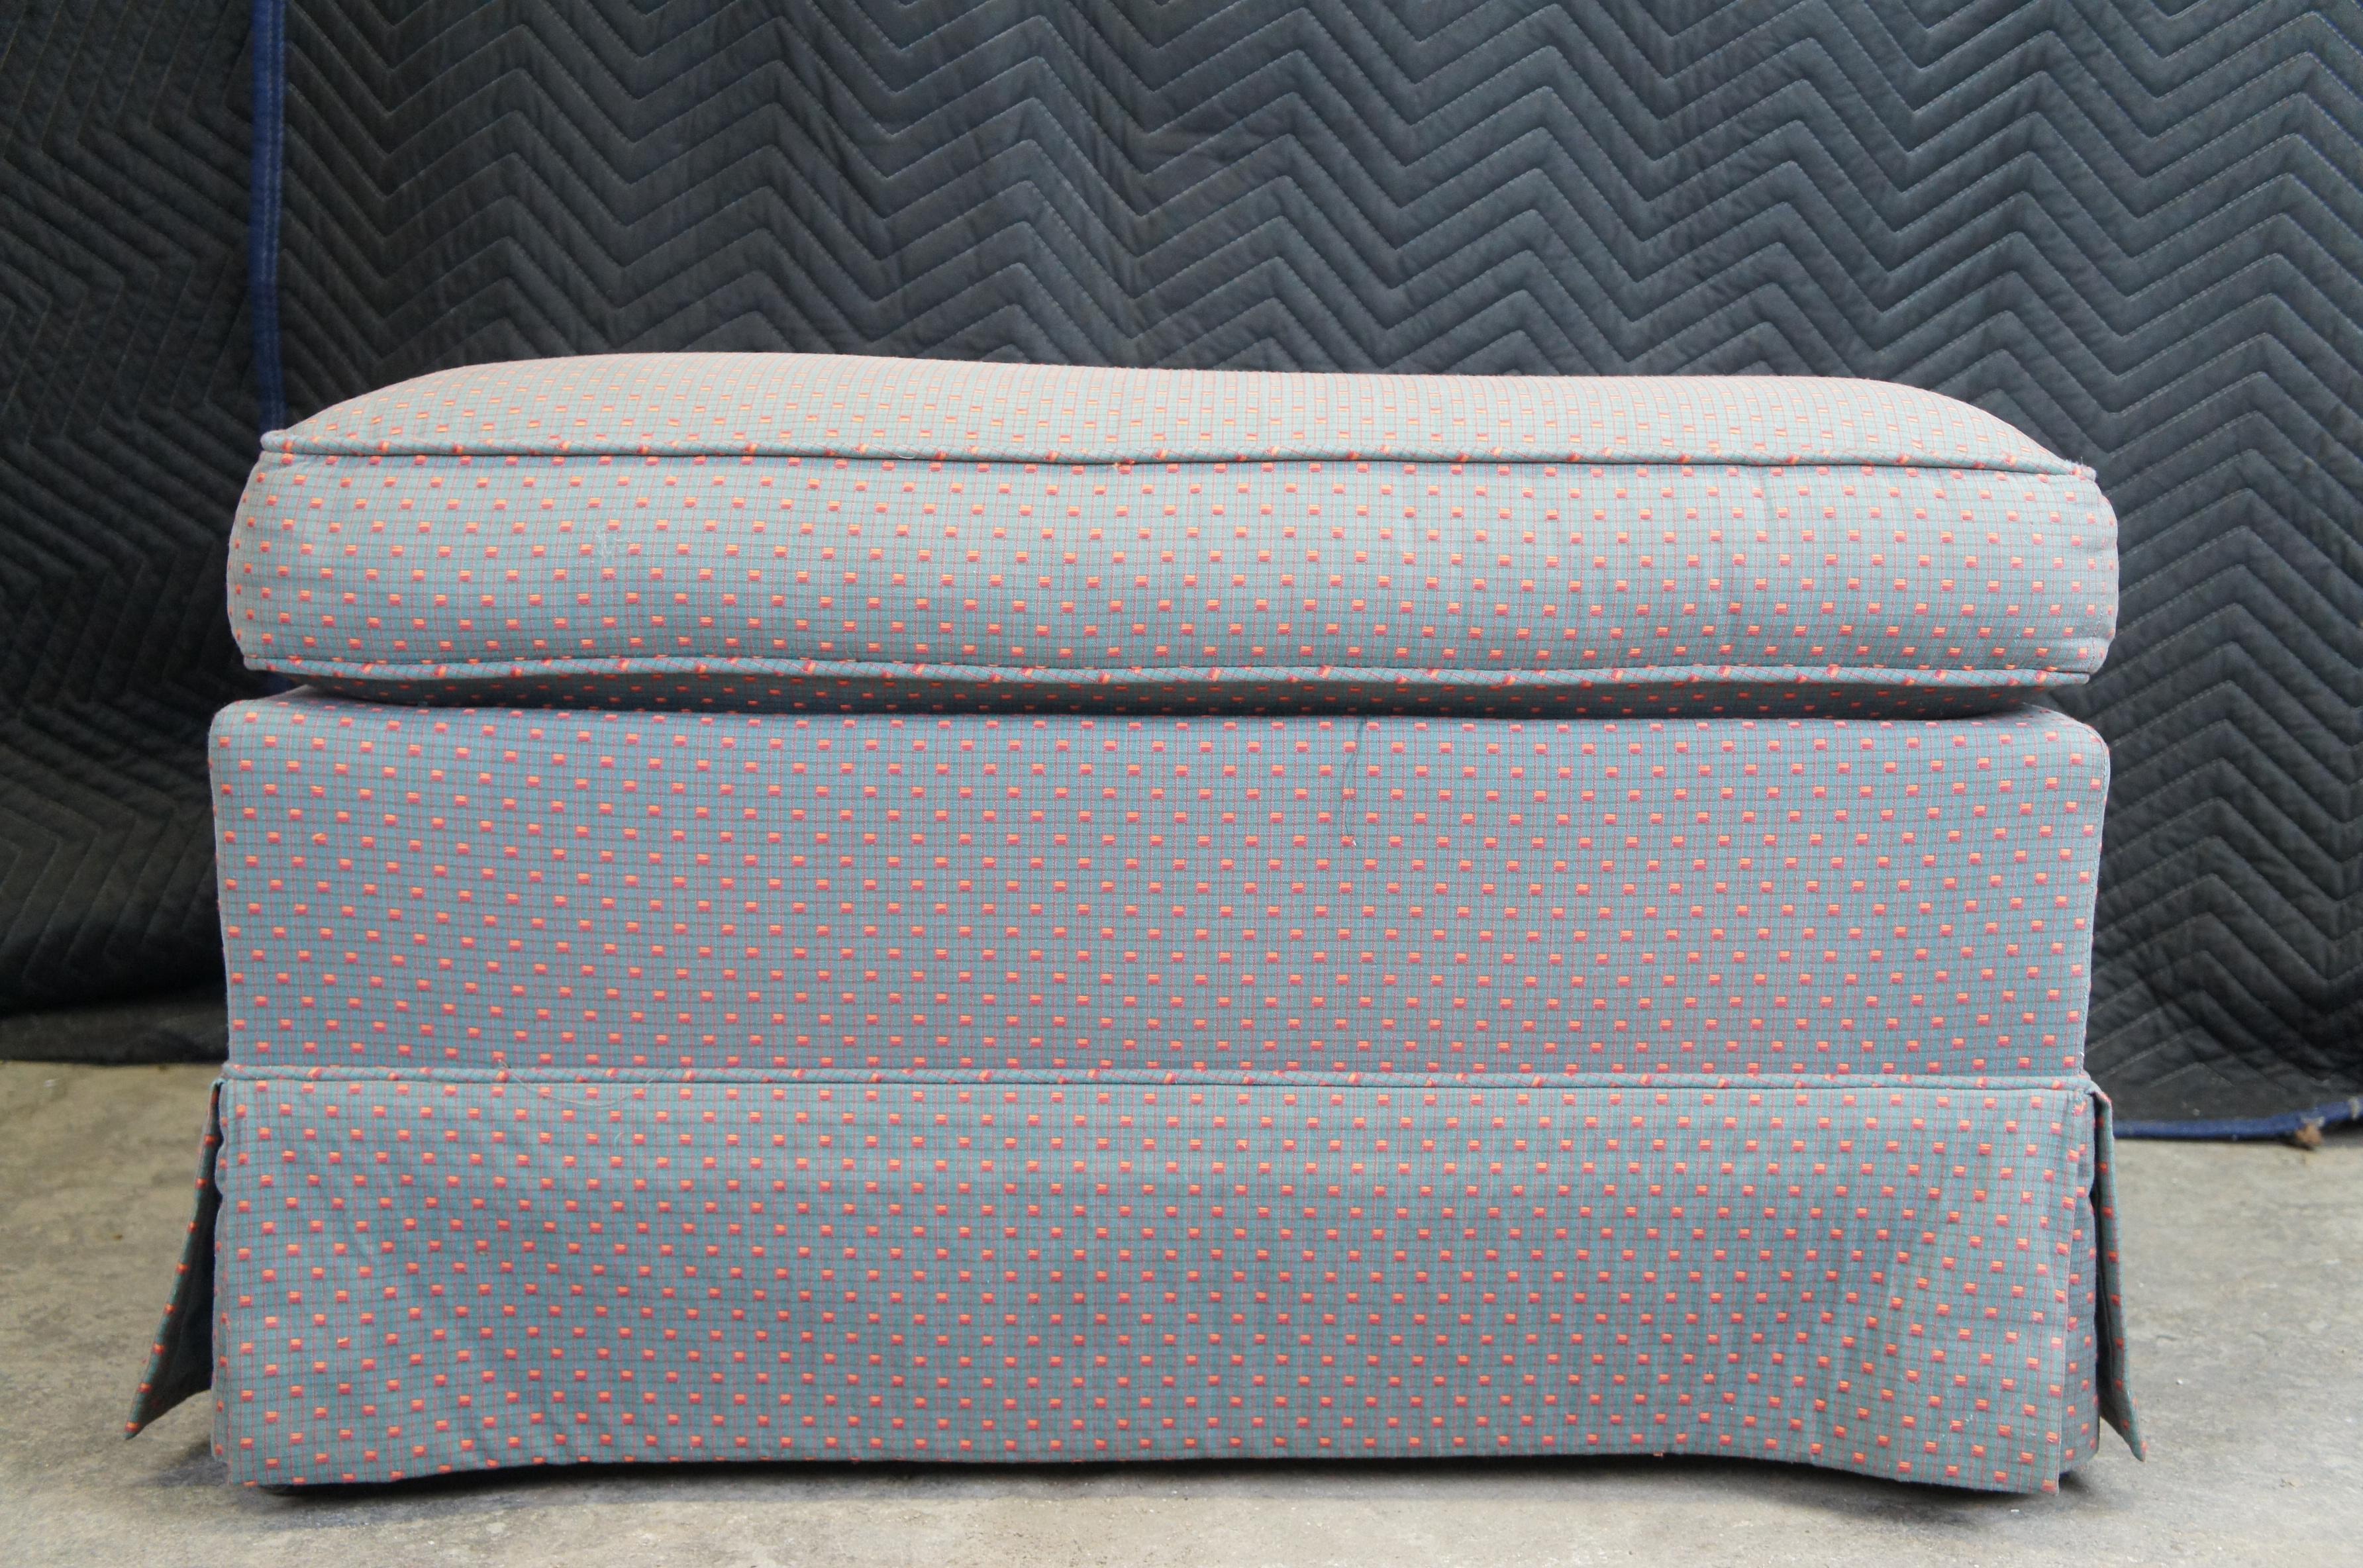 Vintage Heirloom Furniture Polka Dot Upholstered Rolling Ottoman Foot Stool In Good Condition For Sale In Dayton, OH